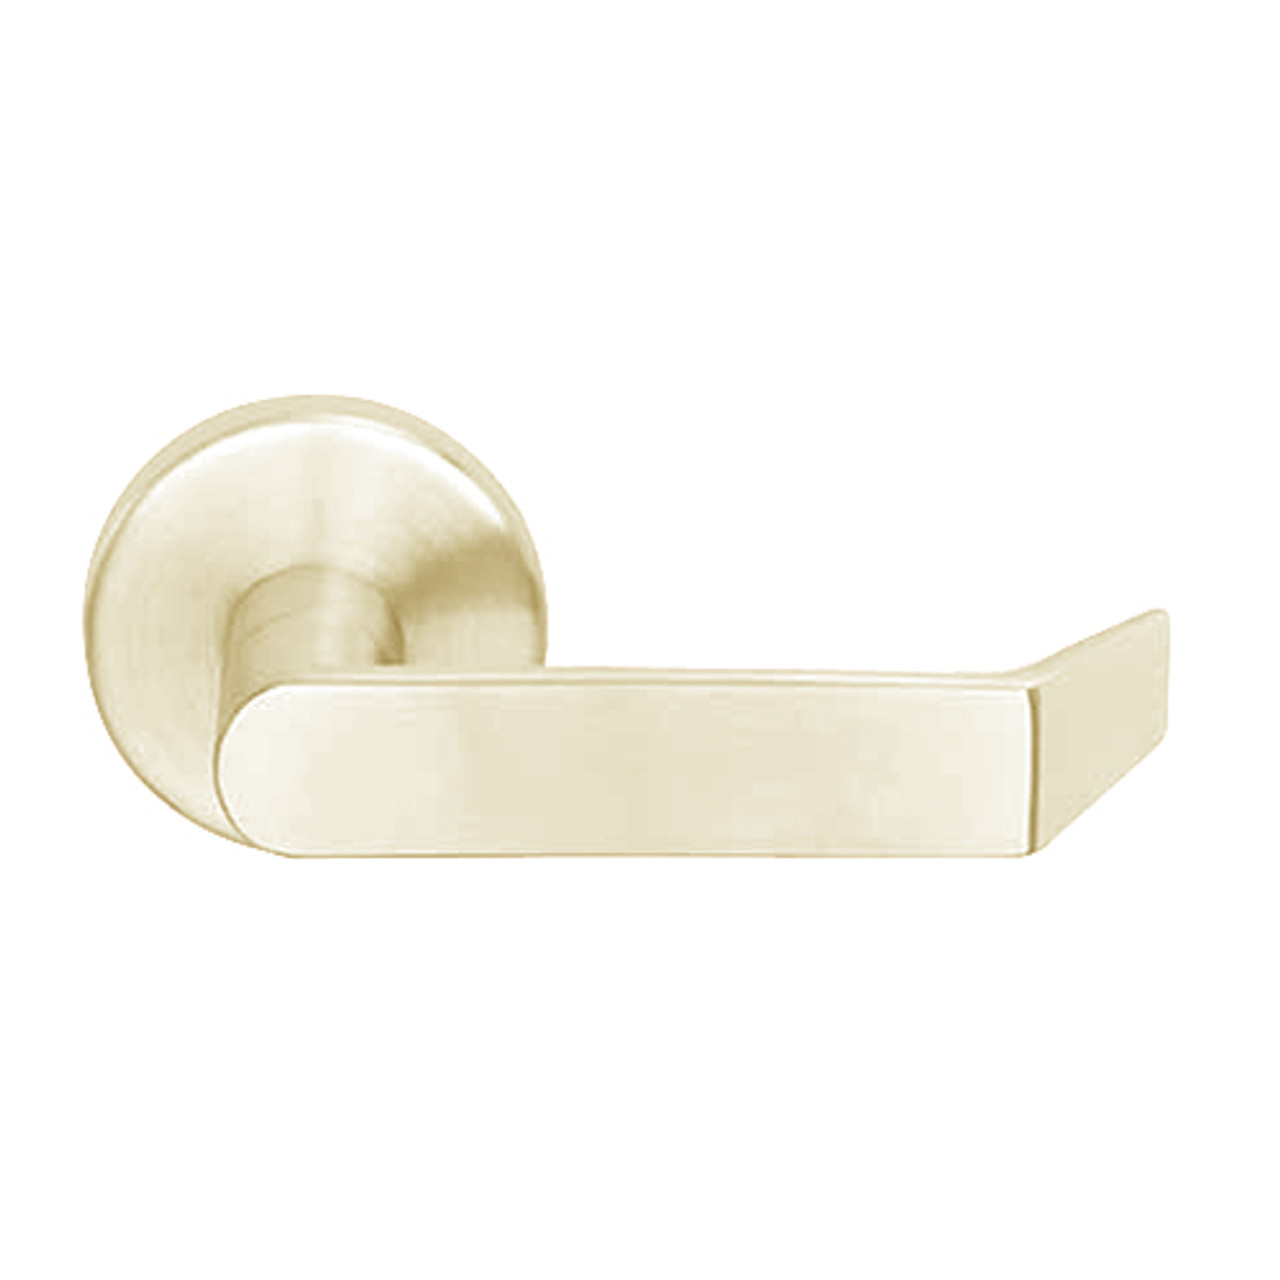 L0172-06B-606 Schlage L Series Double Dummy Trim Commercial Mortise Lock with 06 Cast Lever Design in Satin Brass